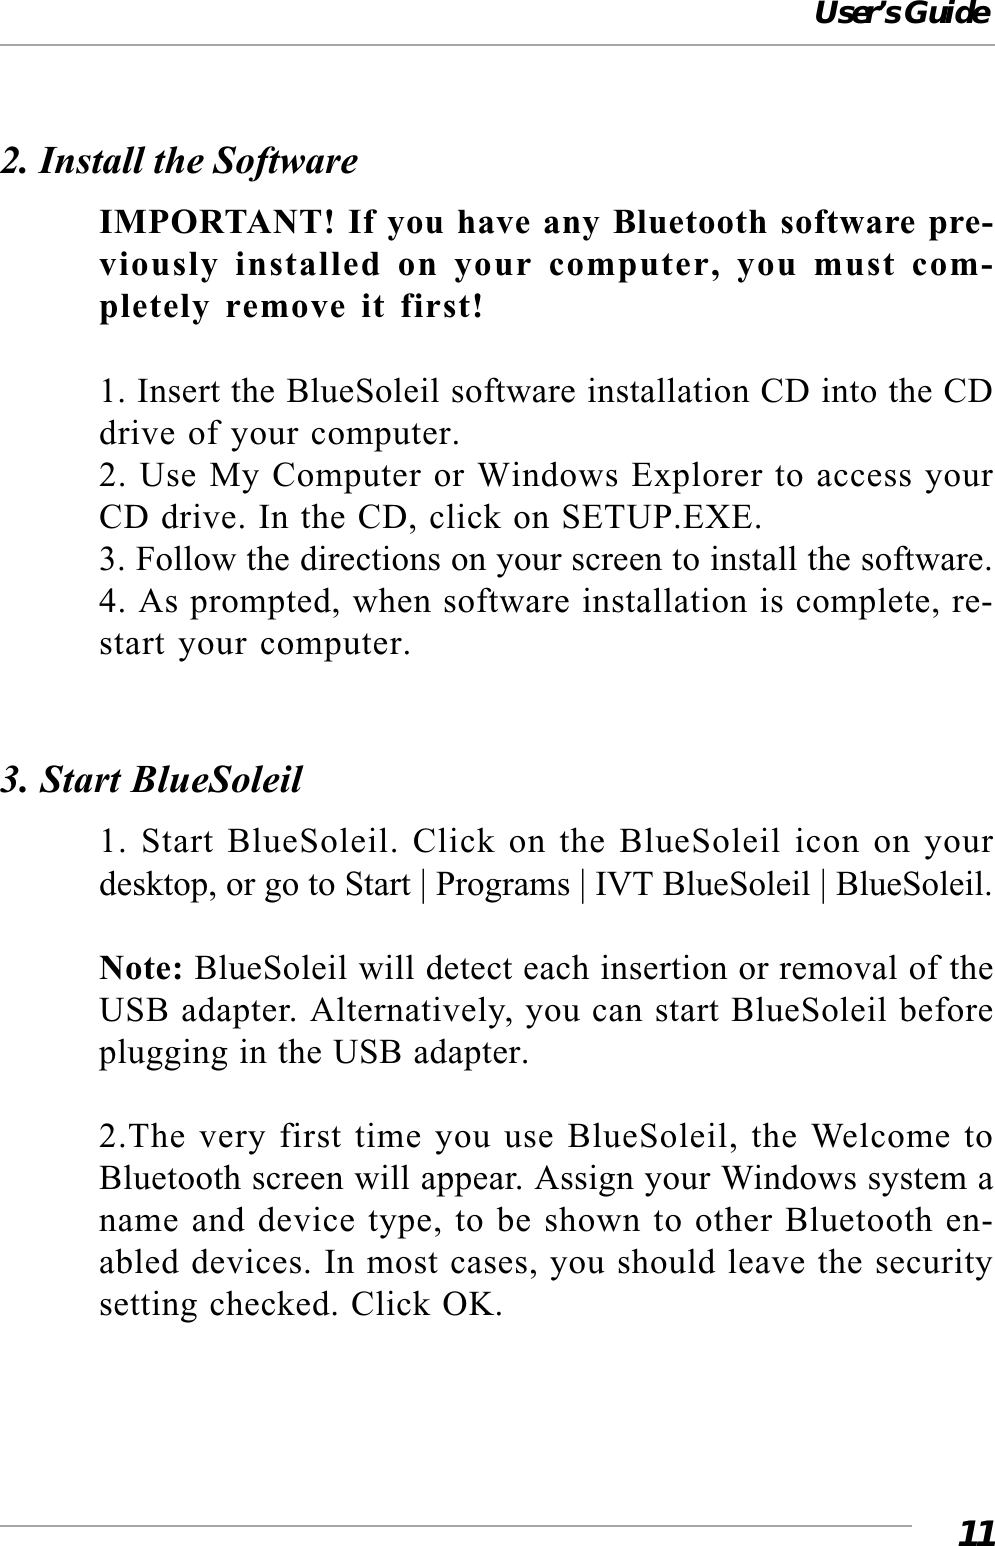 User’s Guide112. Install the SoftwareIMPORTANT! If you have any Bluetooth software pre-viously installed on your computer, you must com-pletely remove it first!1. Insert the BlueSoleil software installation CD into the CDdrive of your computer.2. Use My Computer or Windows Explorer to access yourCD drive. In the CD, click on SETUP.EXE.3. Follow the directions on your screen to install the software.4. As prompted, when software installation is complete, re-start your computer.3. Start BlueSoleil1. Start BlueSoleil. Click on the BlueSoleil icon on yourdesktop, or go to Start | Programs | IVT BlueSoleil | BlueSoleil.Note: BlueSoleil will detect each insertion or removal of theUSB adapter. Alternatively, you can start BlueSoleil beforeplugging in the USB adapter.2.The very first time you use BlueSoleil, the Welcome toBluetooth screen will appear. Assign your Windows system aname and device type, to be shown to other Bluetooth en-abled devices. In most cases, you should leave the securitysetting checked. Click OK.